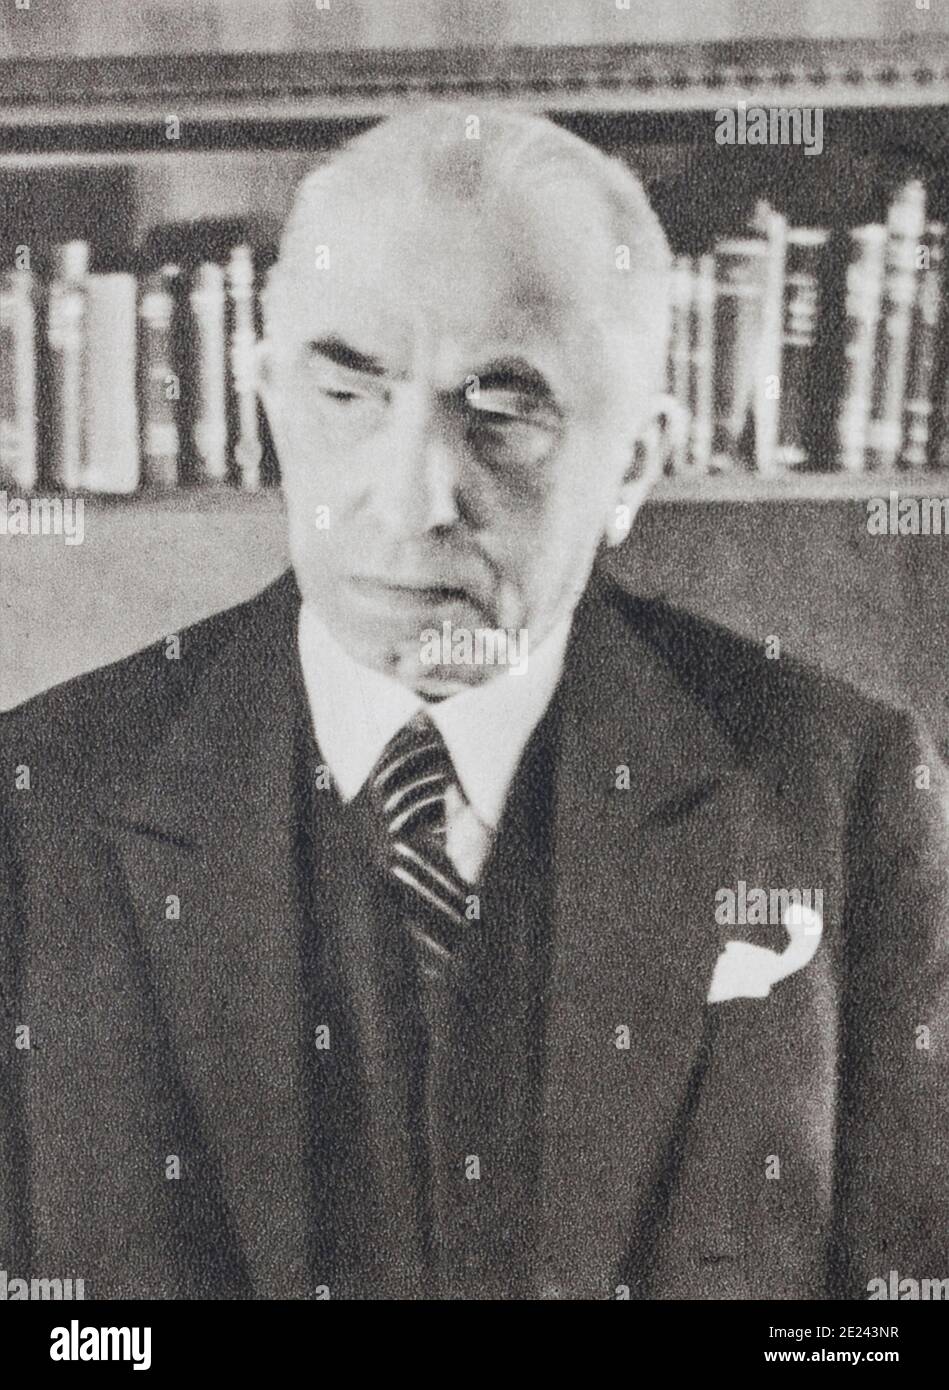 Emil Hacha (1872 – 1945) was a Czech lawyer, the third President of  Czechoslovakia from 1938 to 1939. From March 1939, his country was under  the contr Stock Photo - Alamy